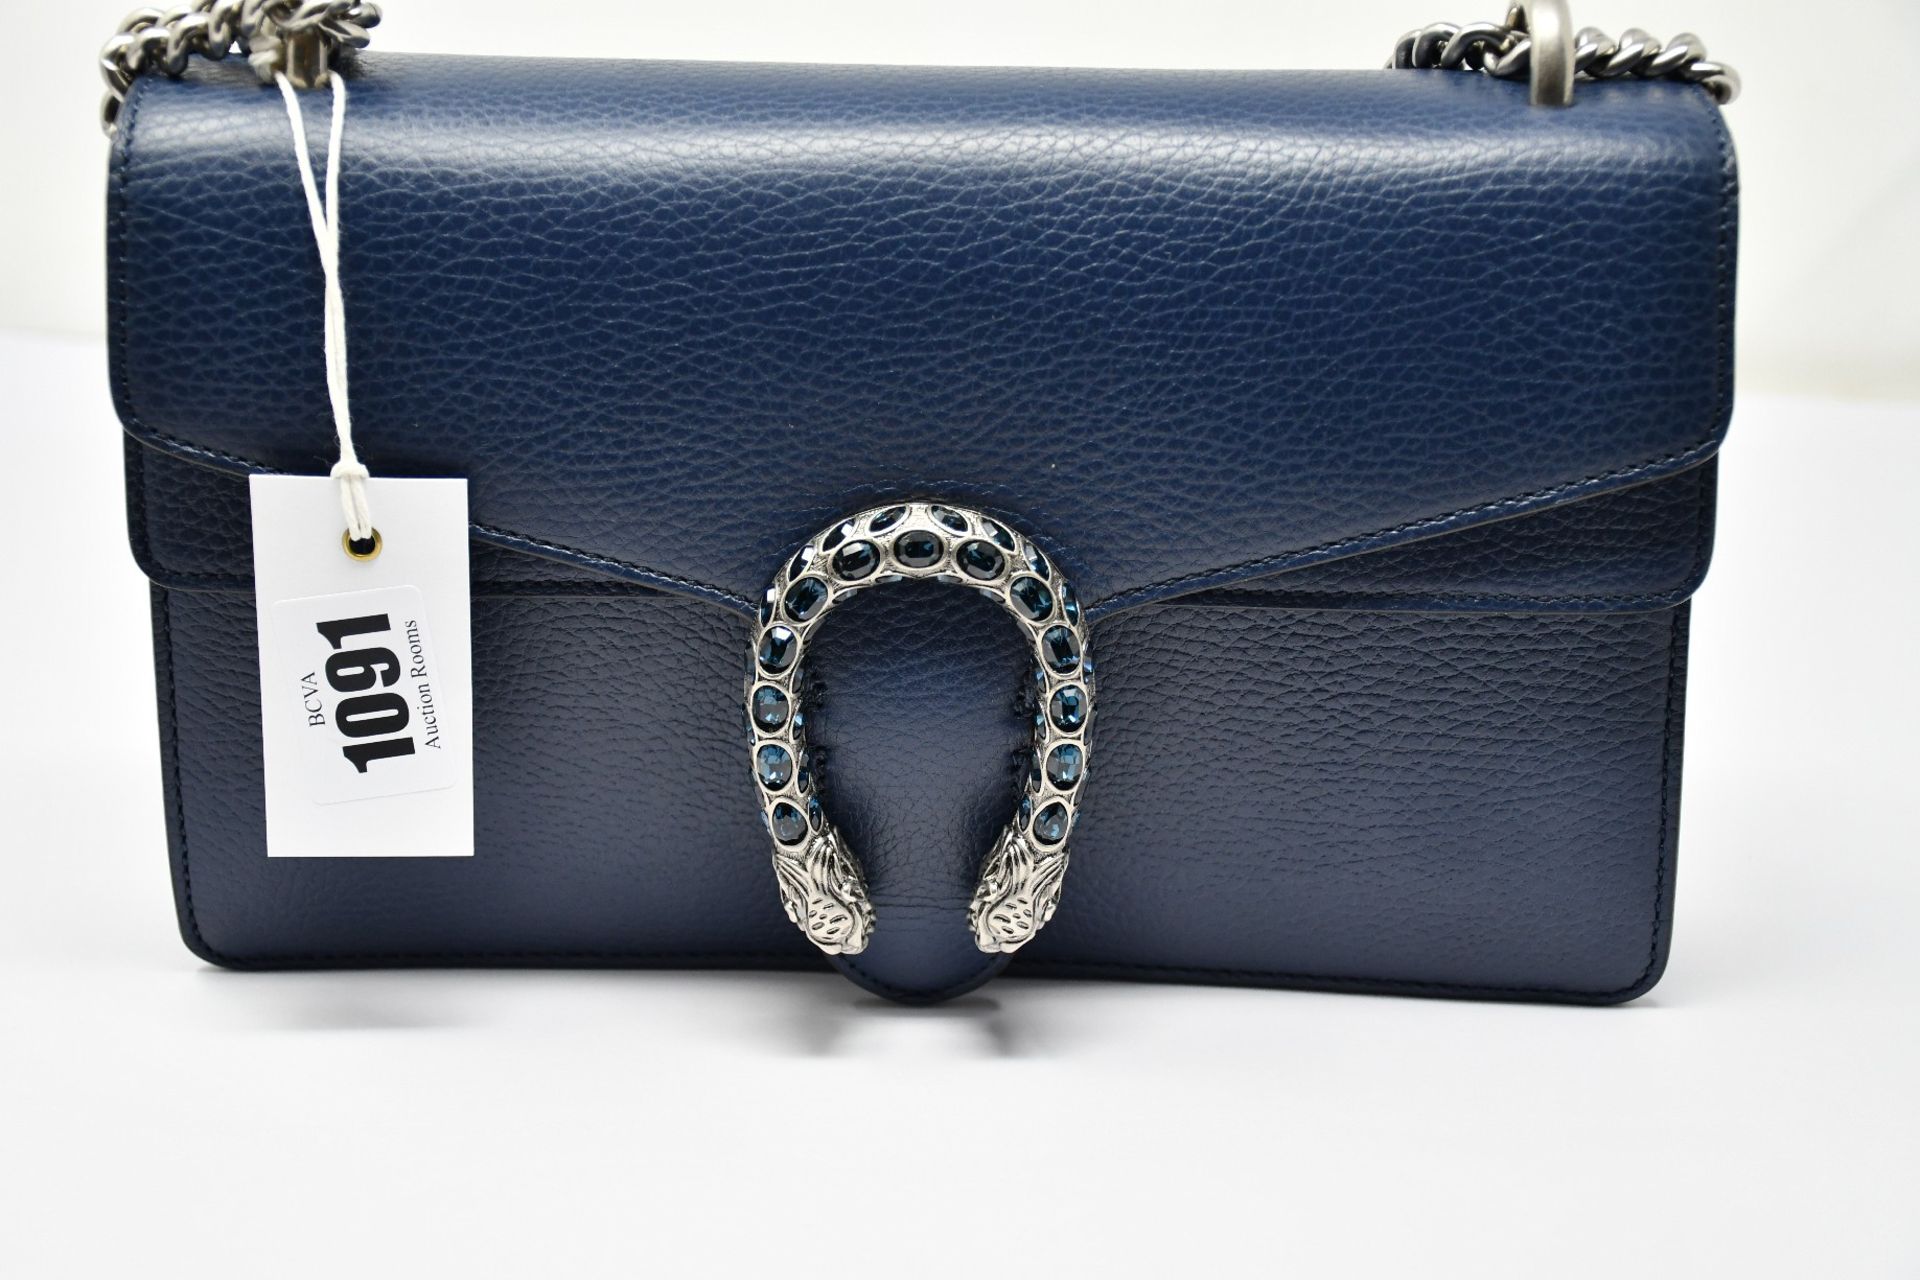 An as new Gucci Dionysus handbag in navy with dust bag (RRP £2,080).